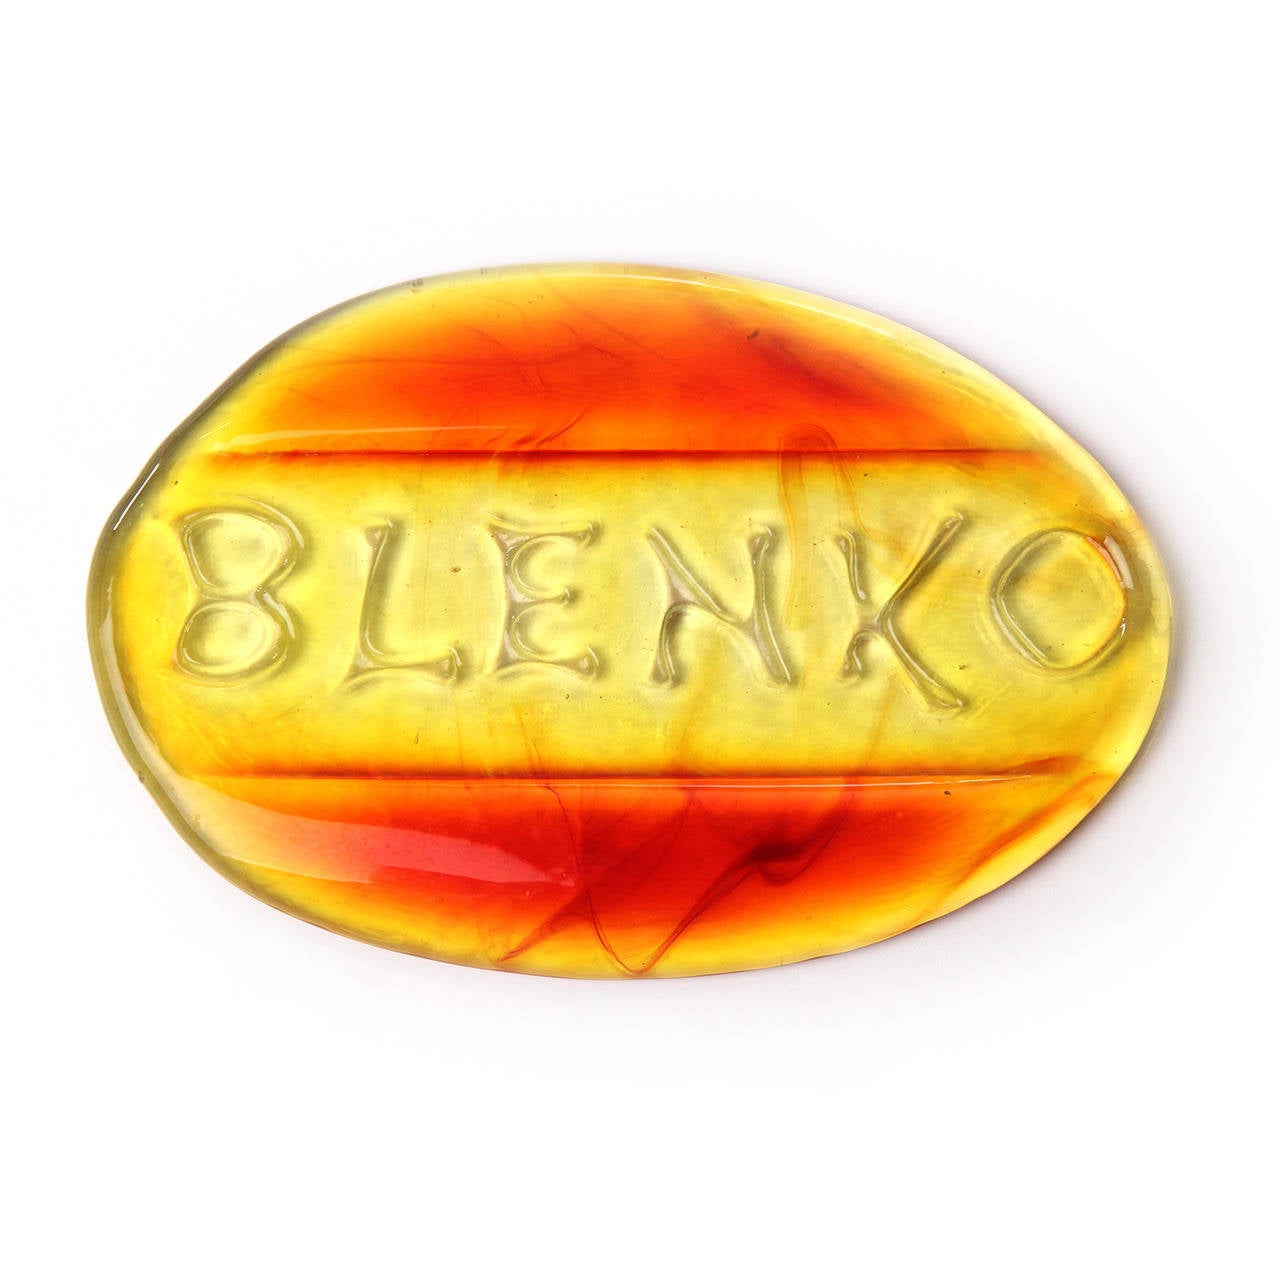 An uncommon and handmade glass desk weight in luminous tones of amber and red advertising the Blenko Glass works.